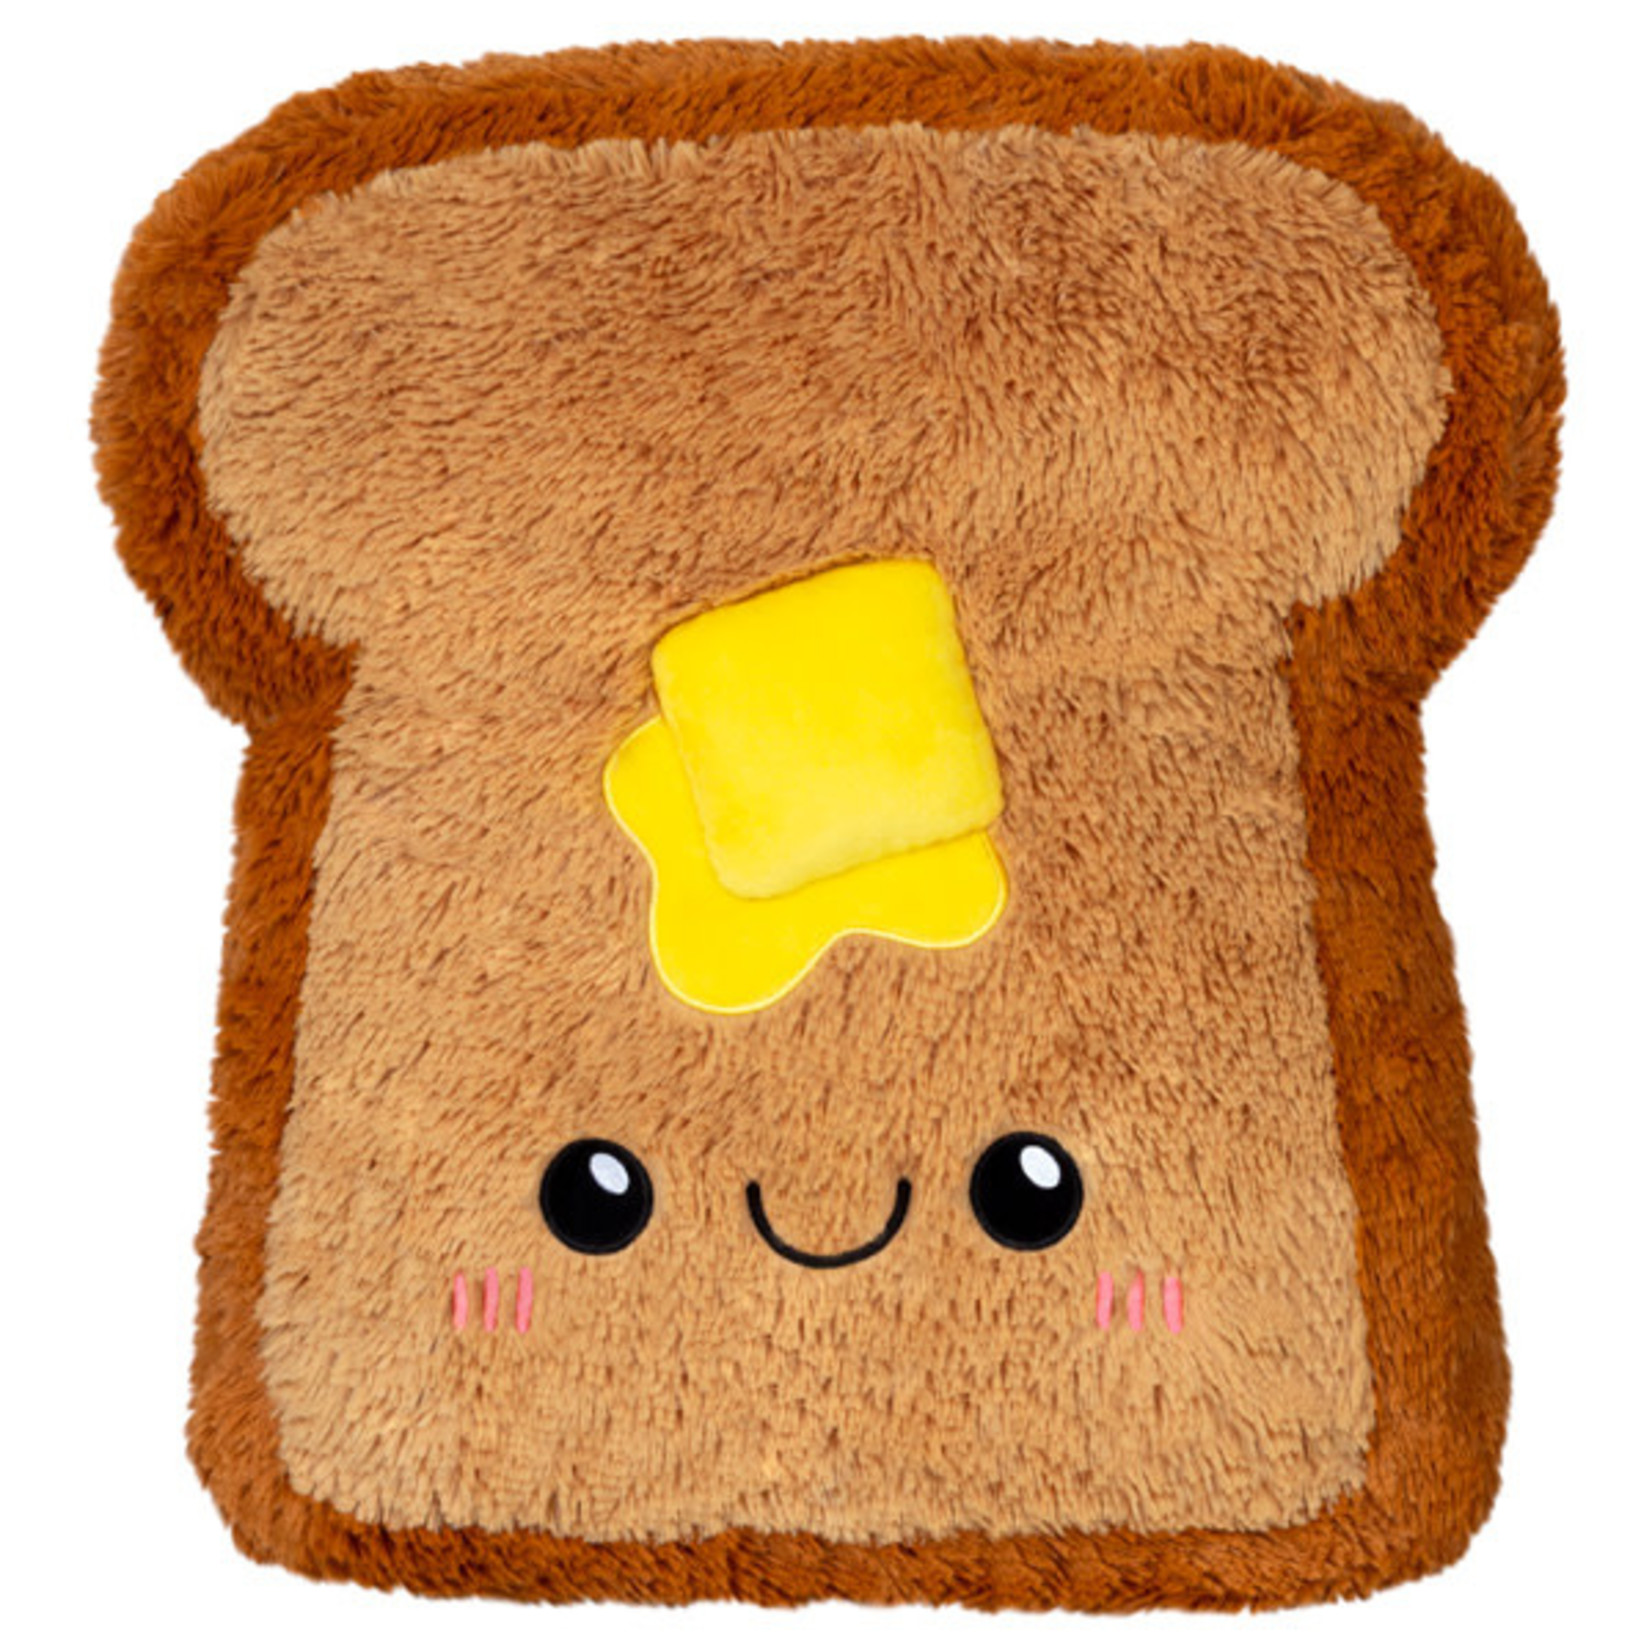 Squishable Buttered Toast Squishable